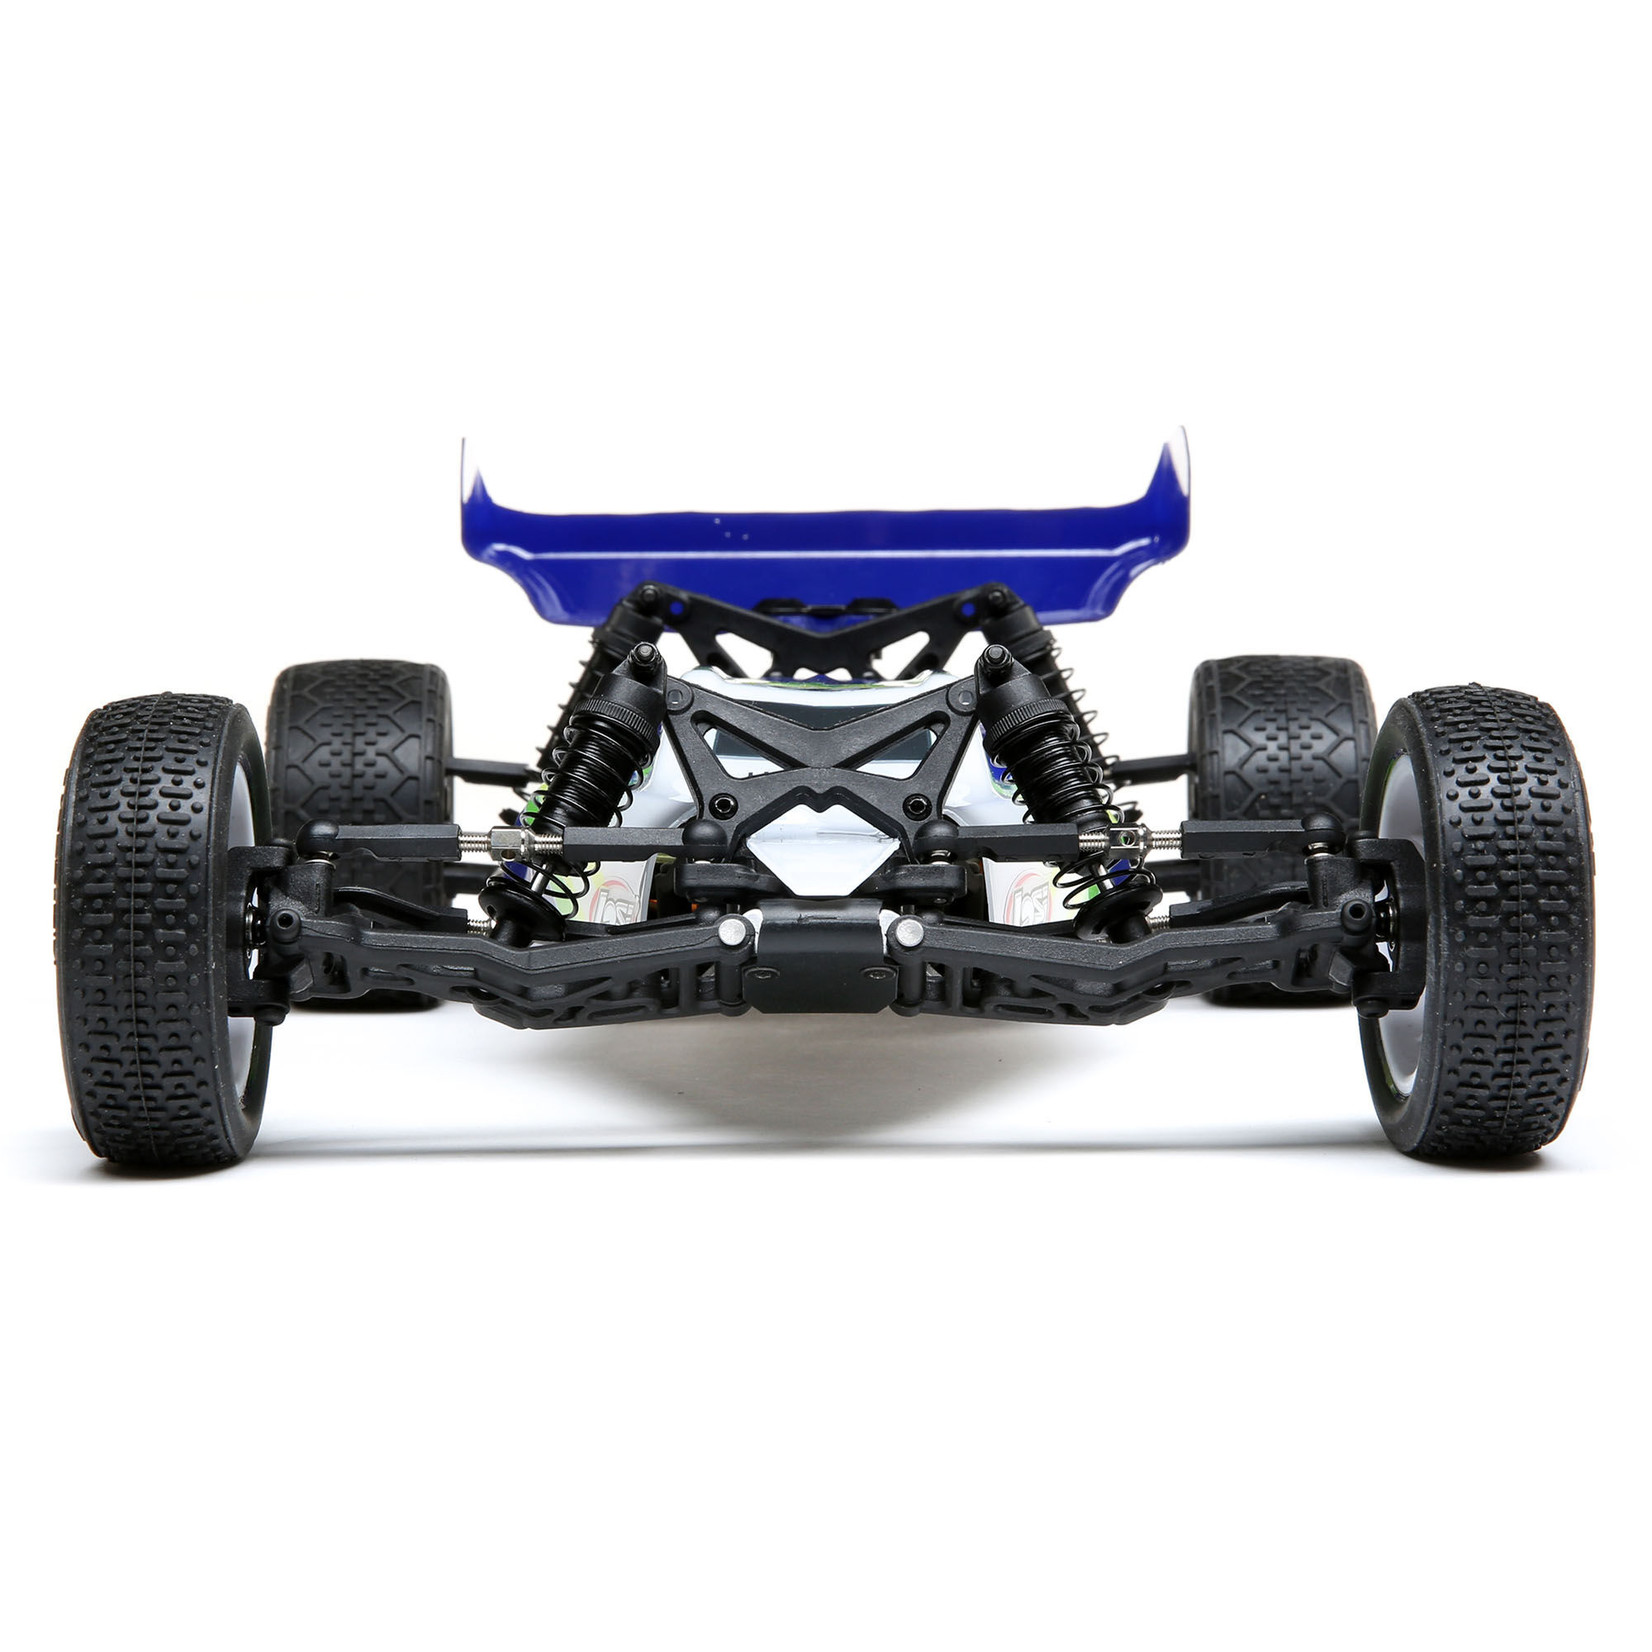 1/16 Mini-B Brushed RTR 2WD Buggy, Blue/White - Get A Hobby